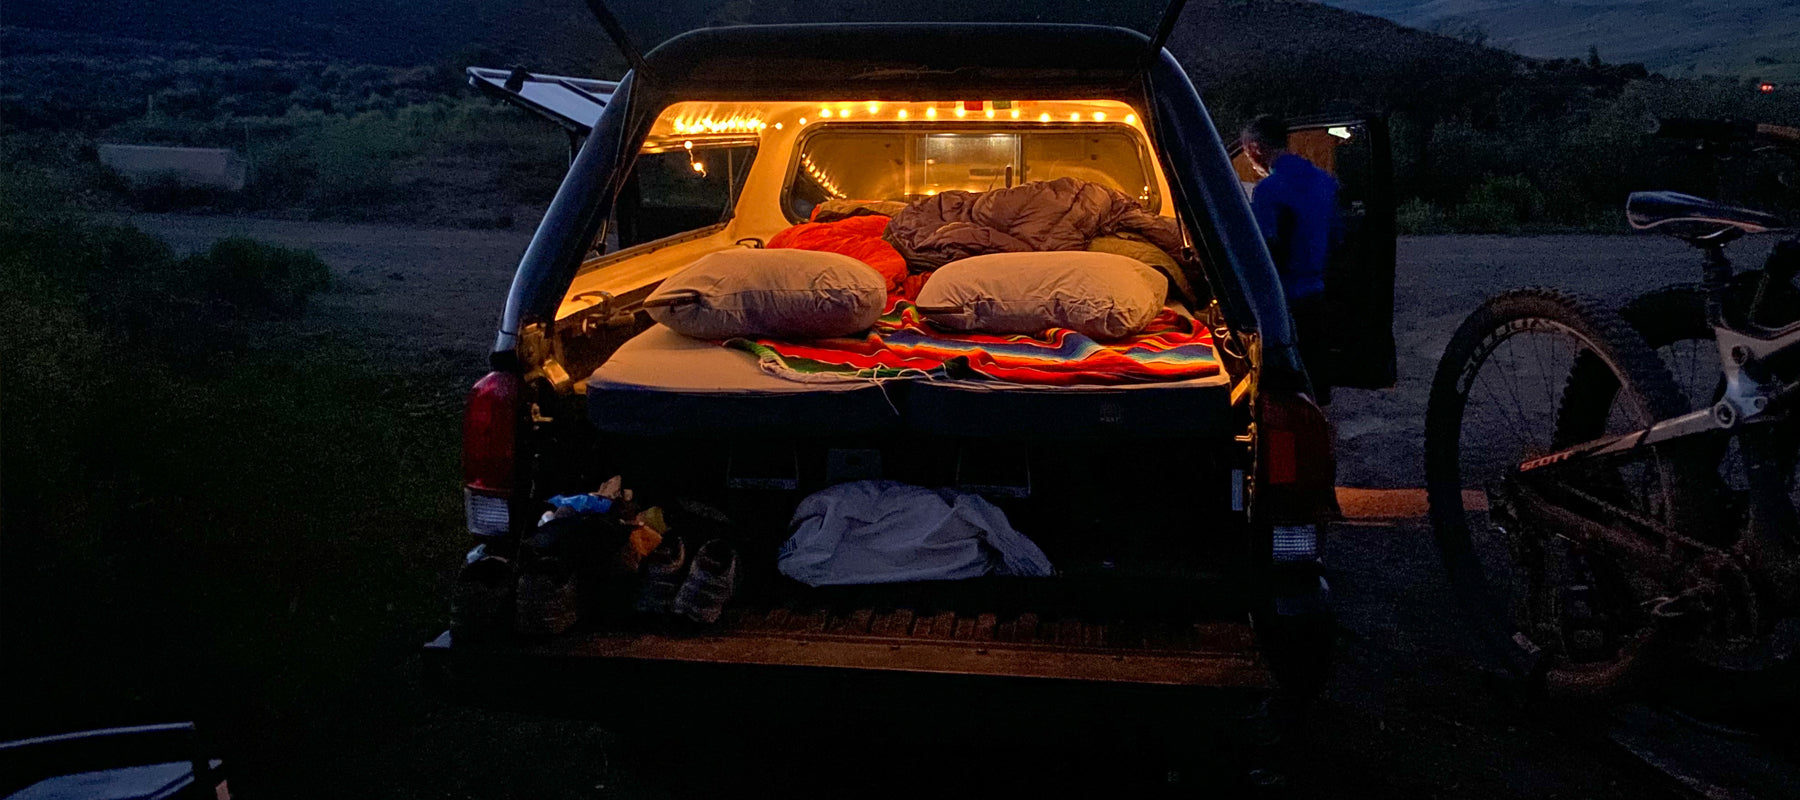 Toyota Tacoma truck bed with a HEST mattress inside. Best for car camping truck conversion.